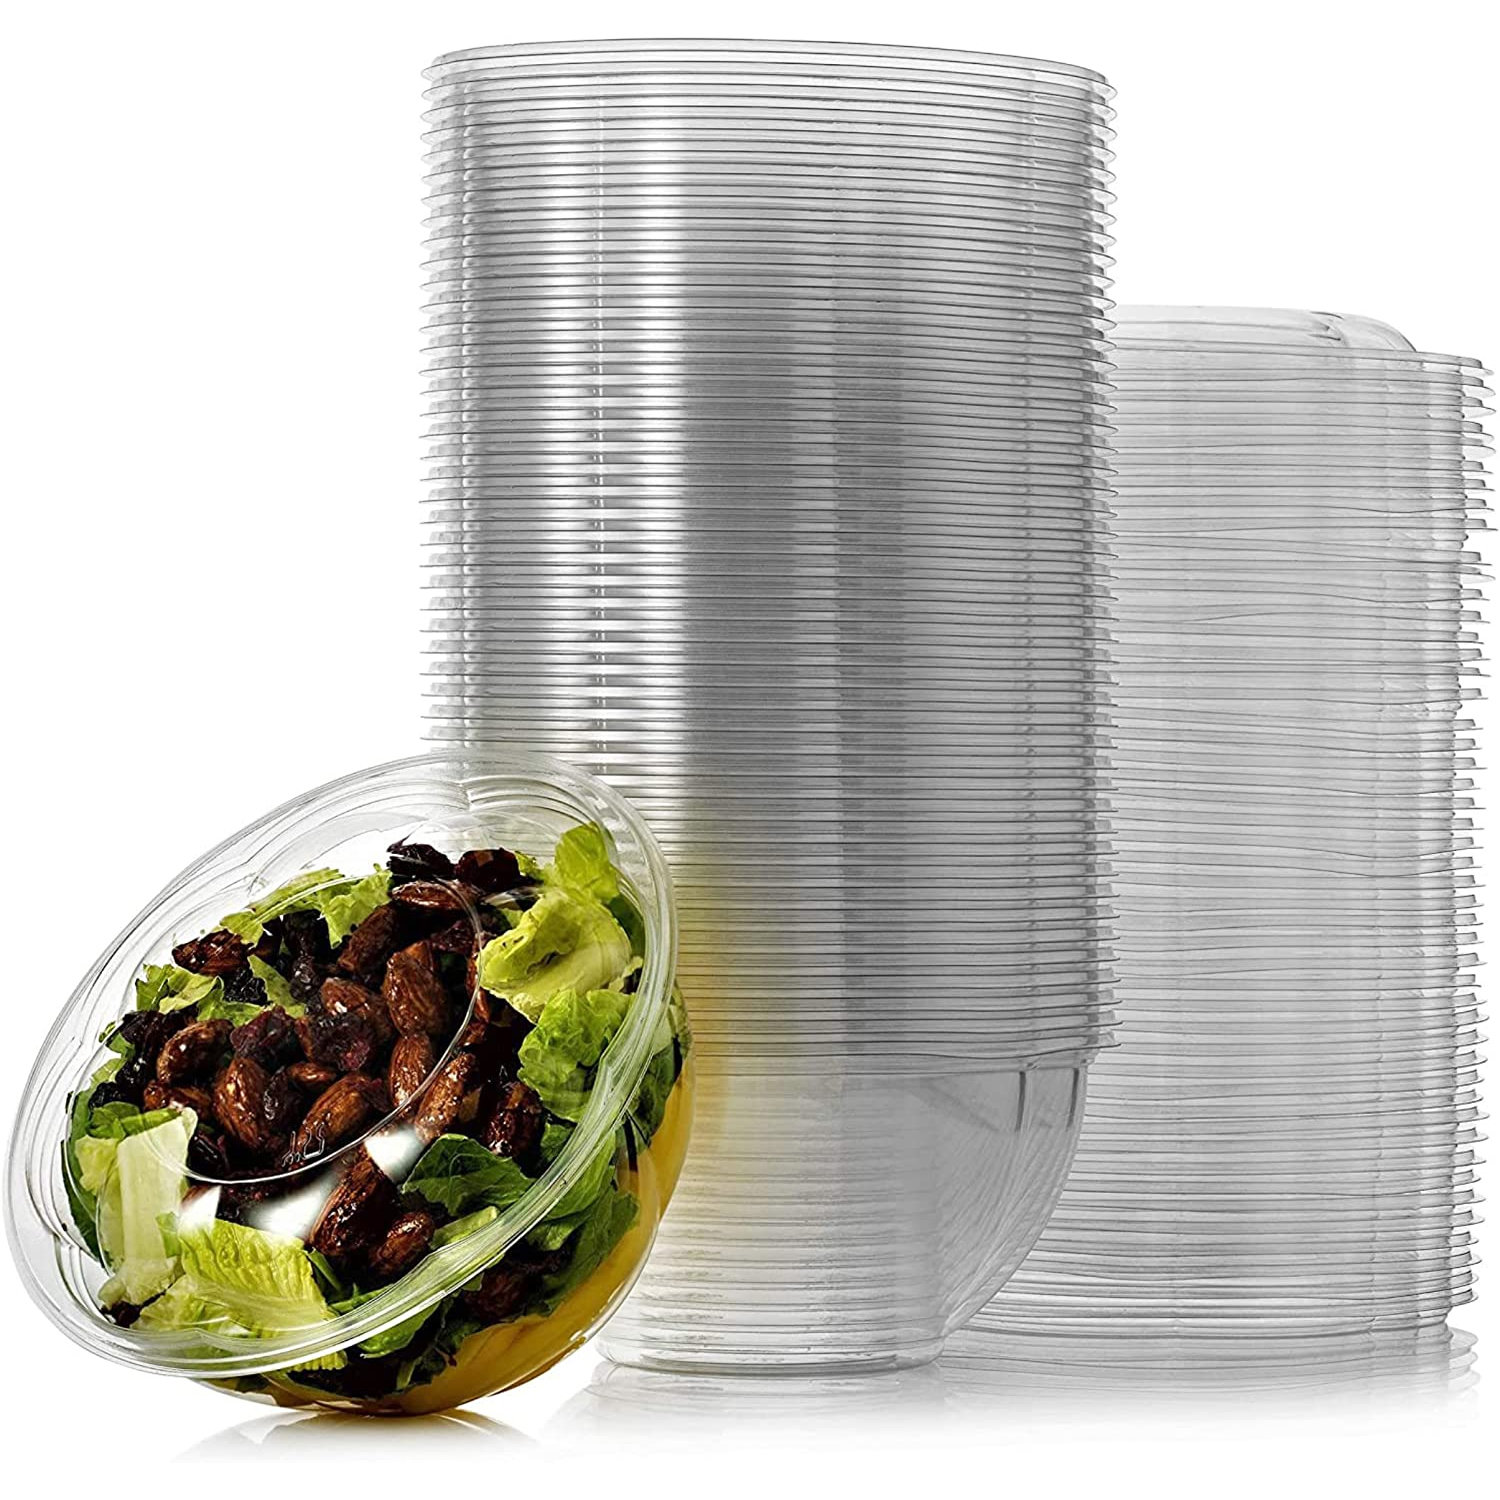 50 Pack Salad Container for Lunch - 18 oz Clear Plastic Bowls - Round Disposable Salad Bowls with Lids - Airtight Leak Resistant Meal Prep Bowls 